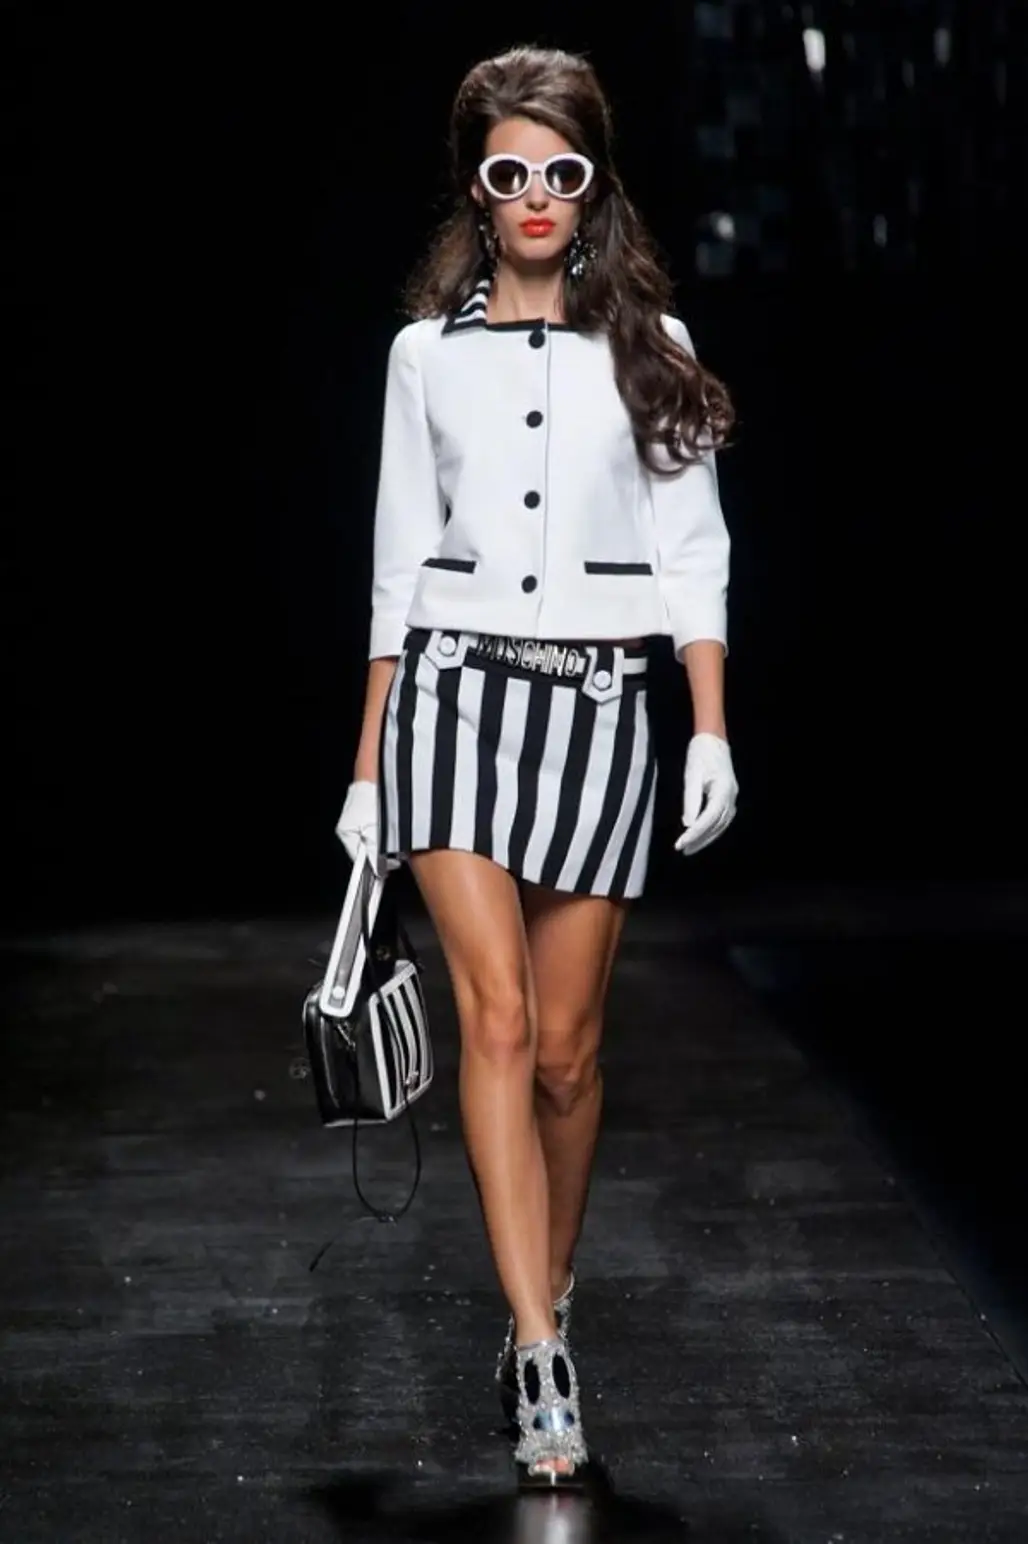 Become the Mistress of Monochrome